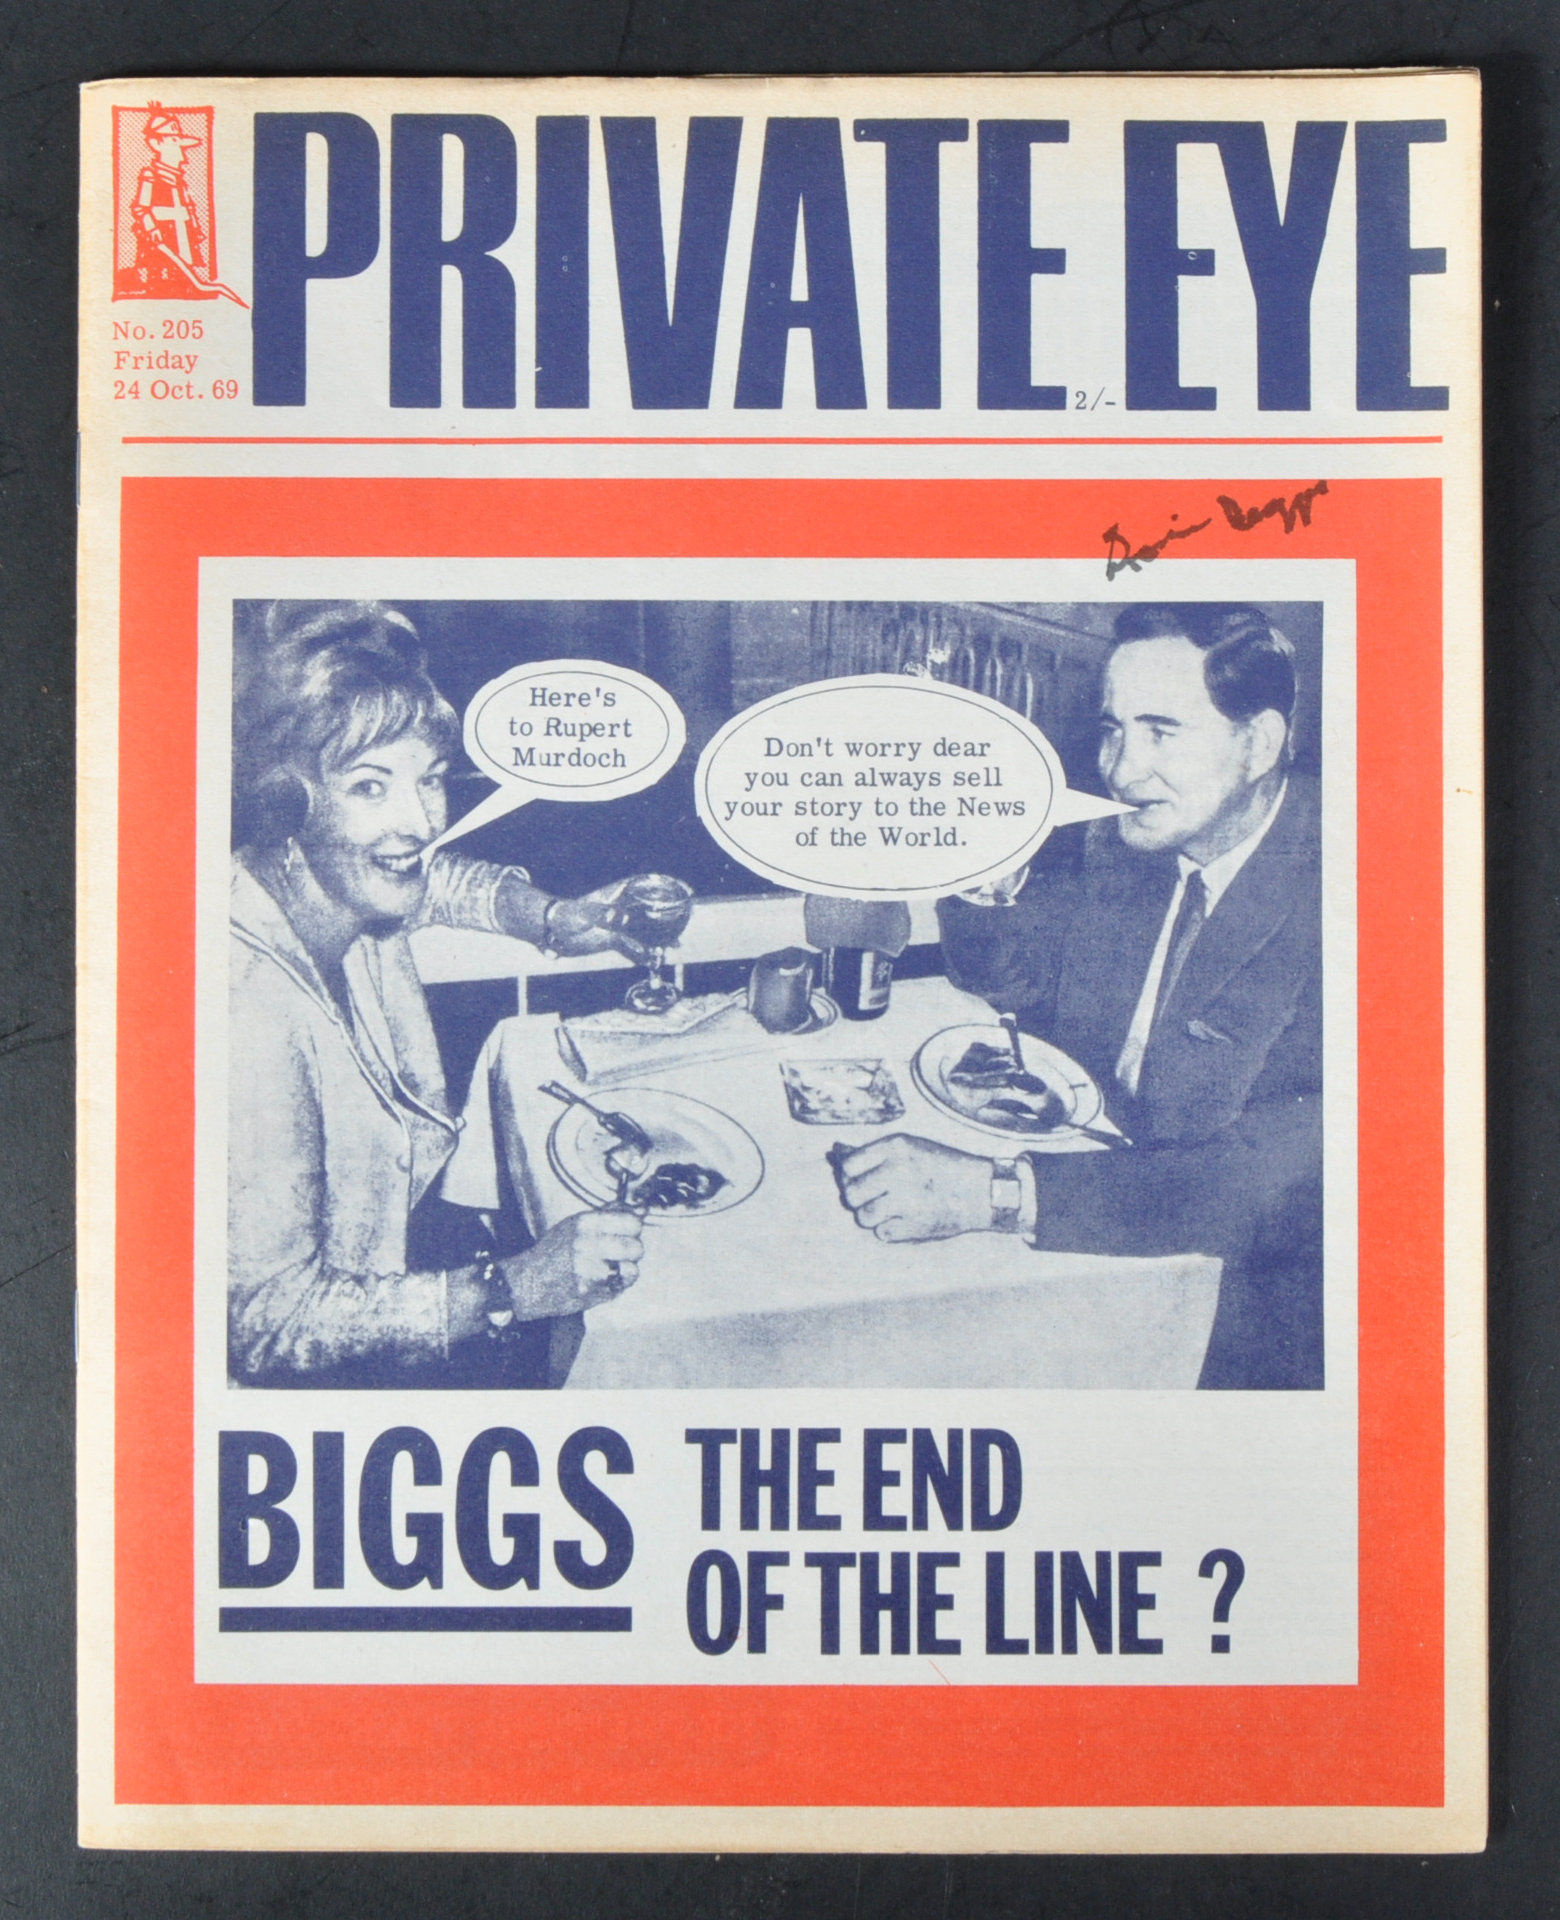 GREAT TRAIN ROBBERY - RONNIE BIGGS (1929-2013) - SIGNED PRIVATE EYE